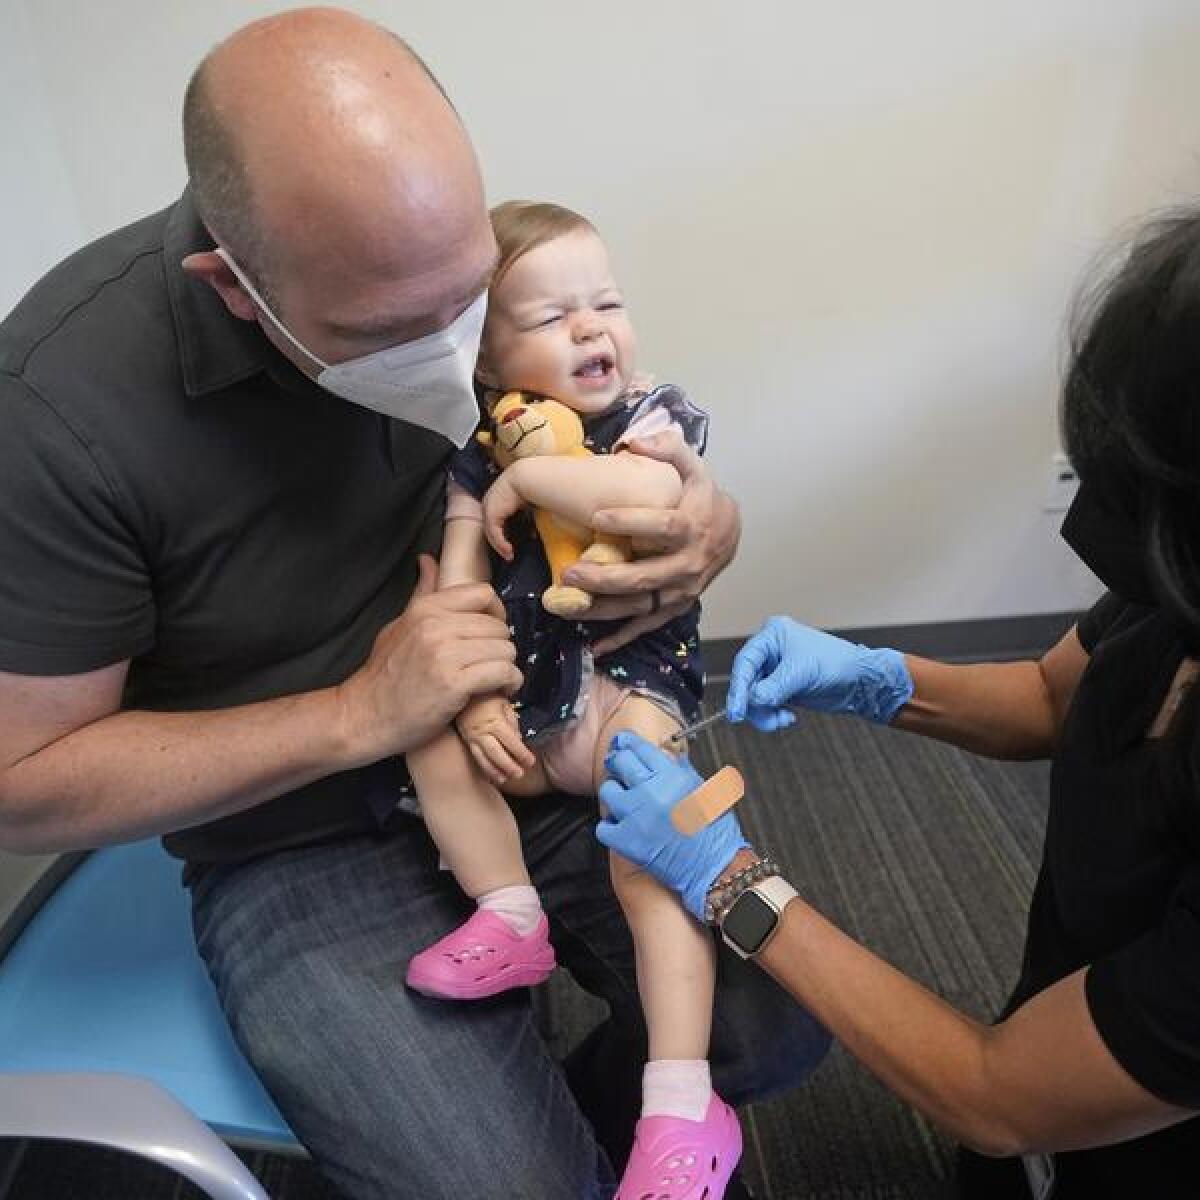 A child gets a COVID-19 vaccine in the United States.